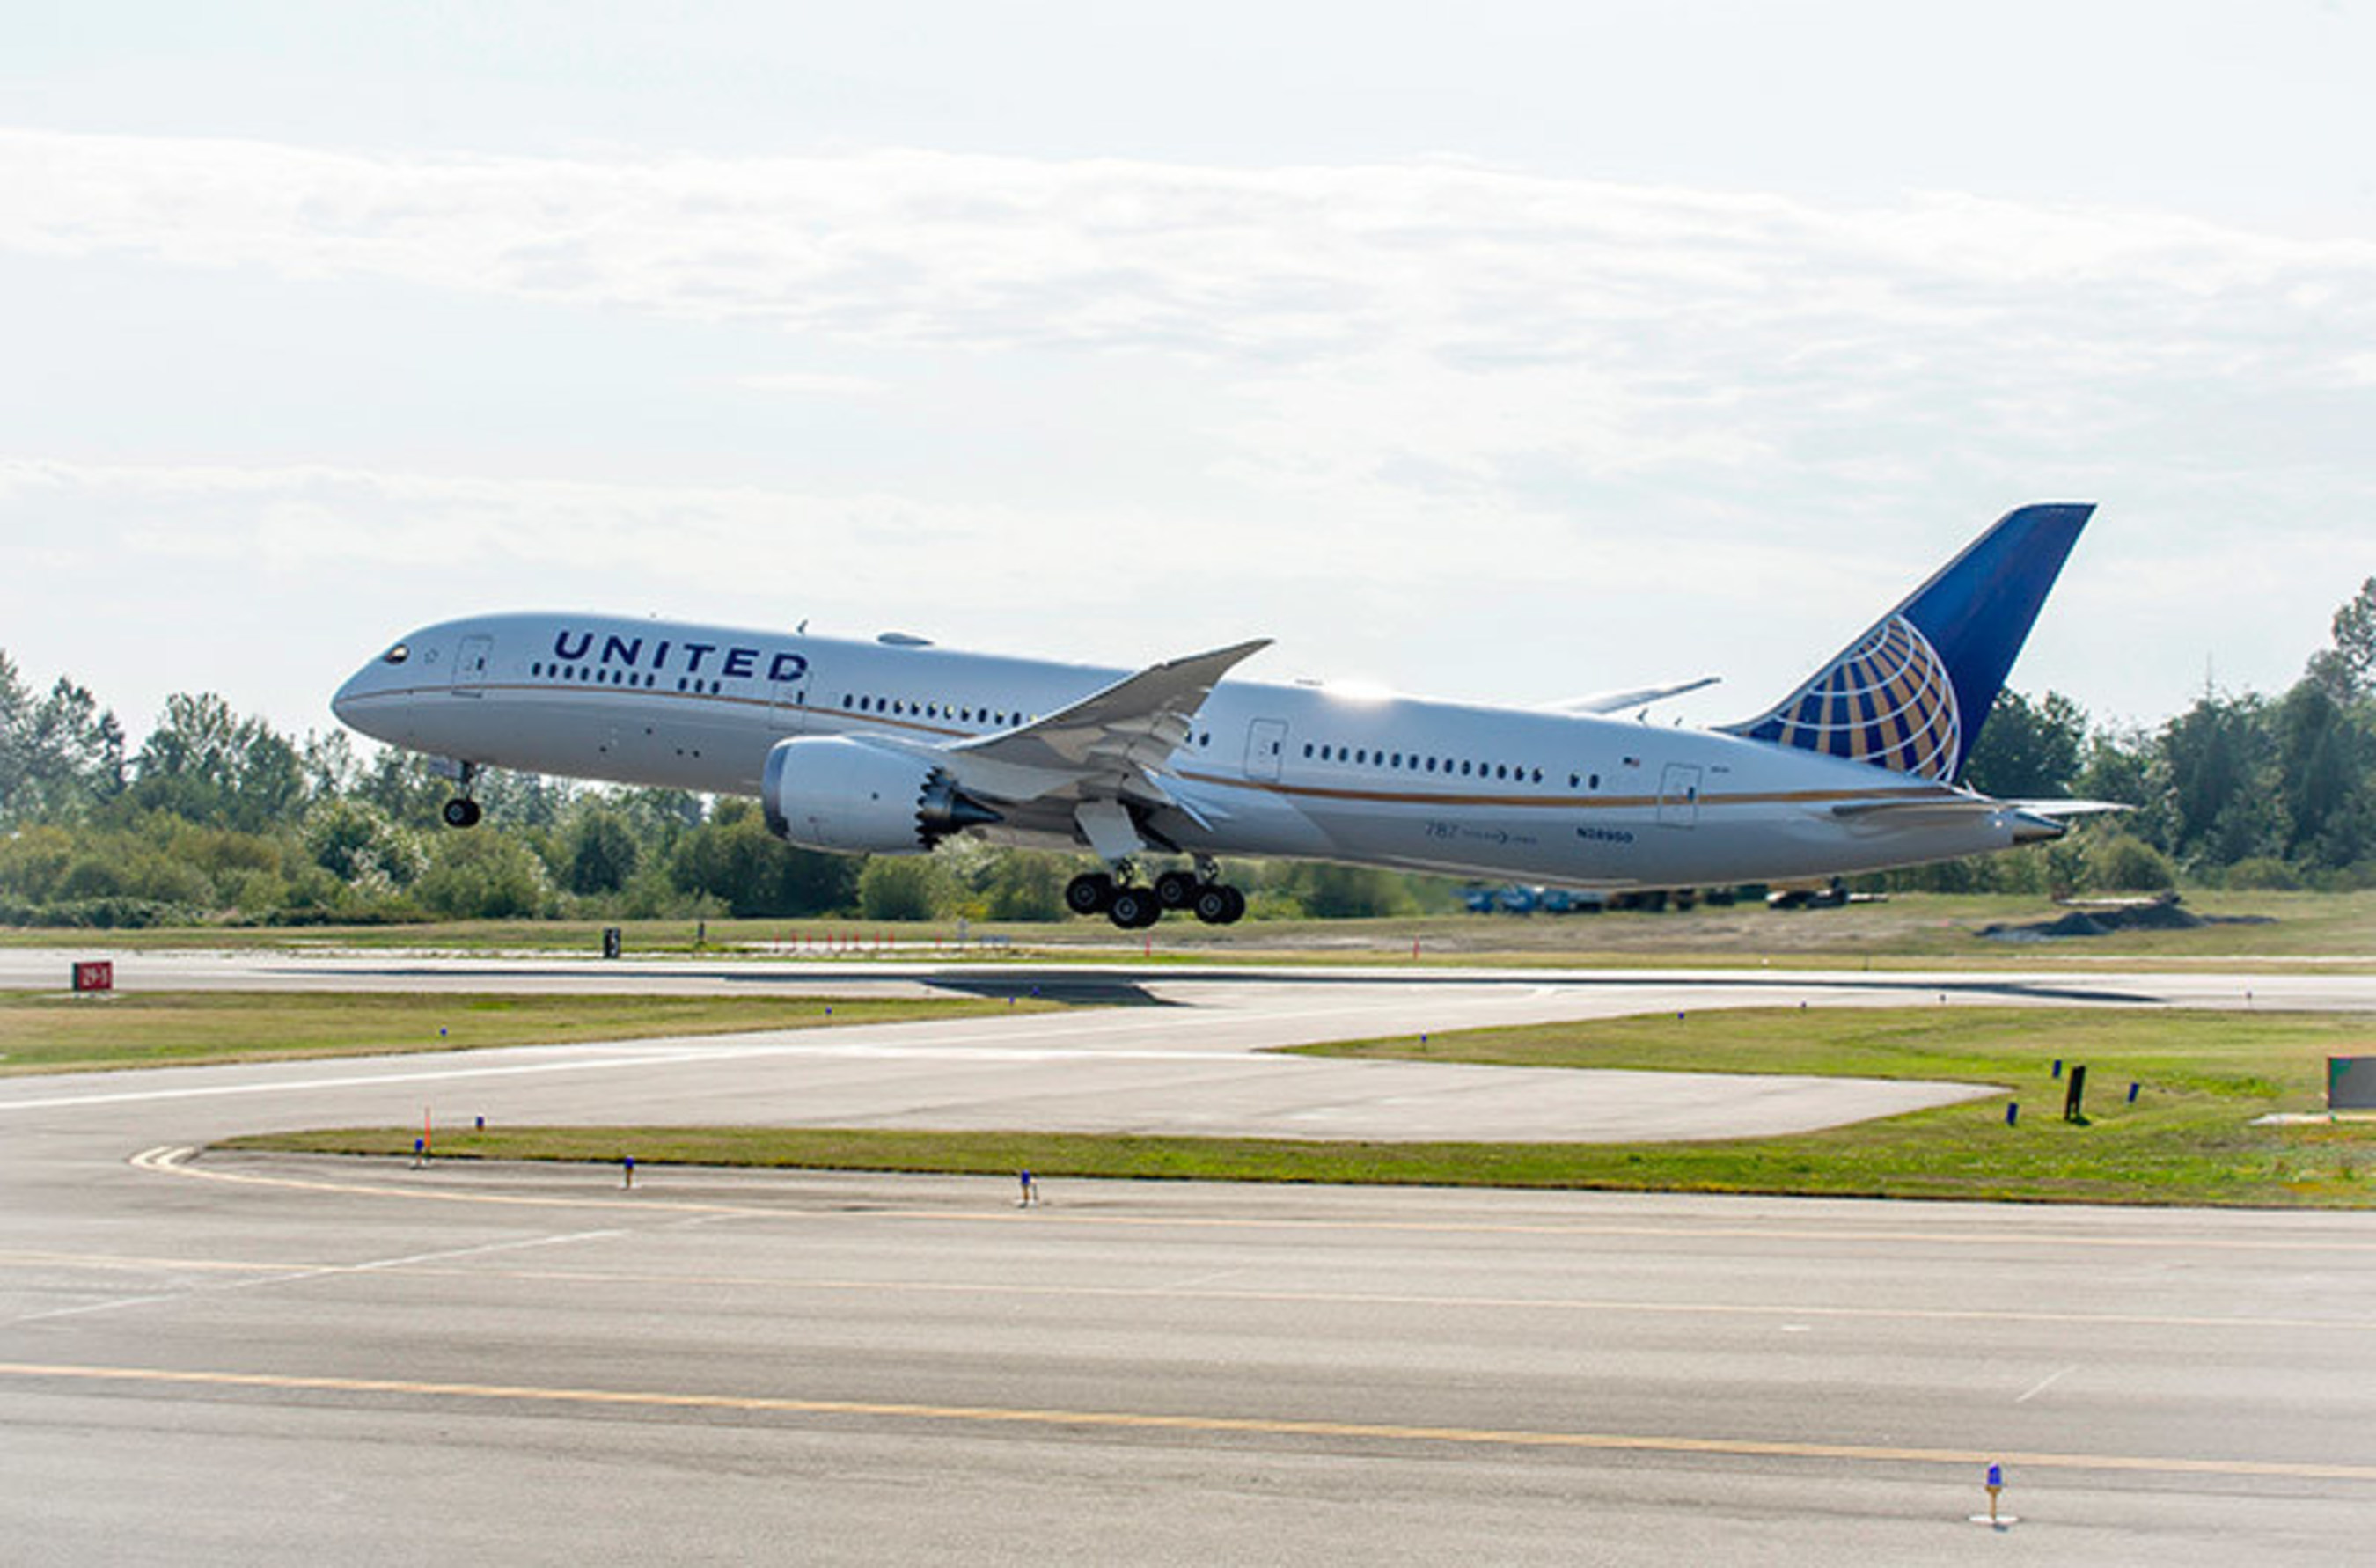 One of United's newest aircraft, the Boeing 787-9